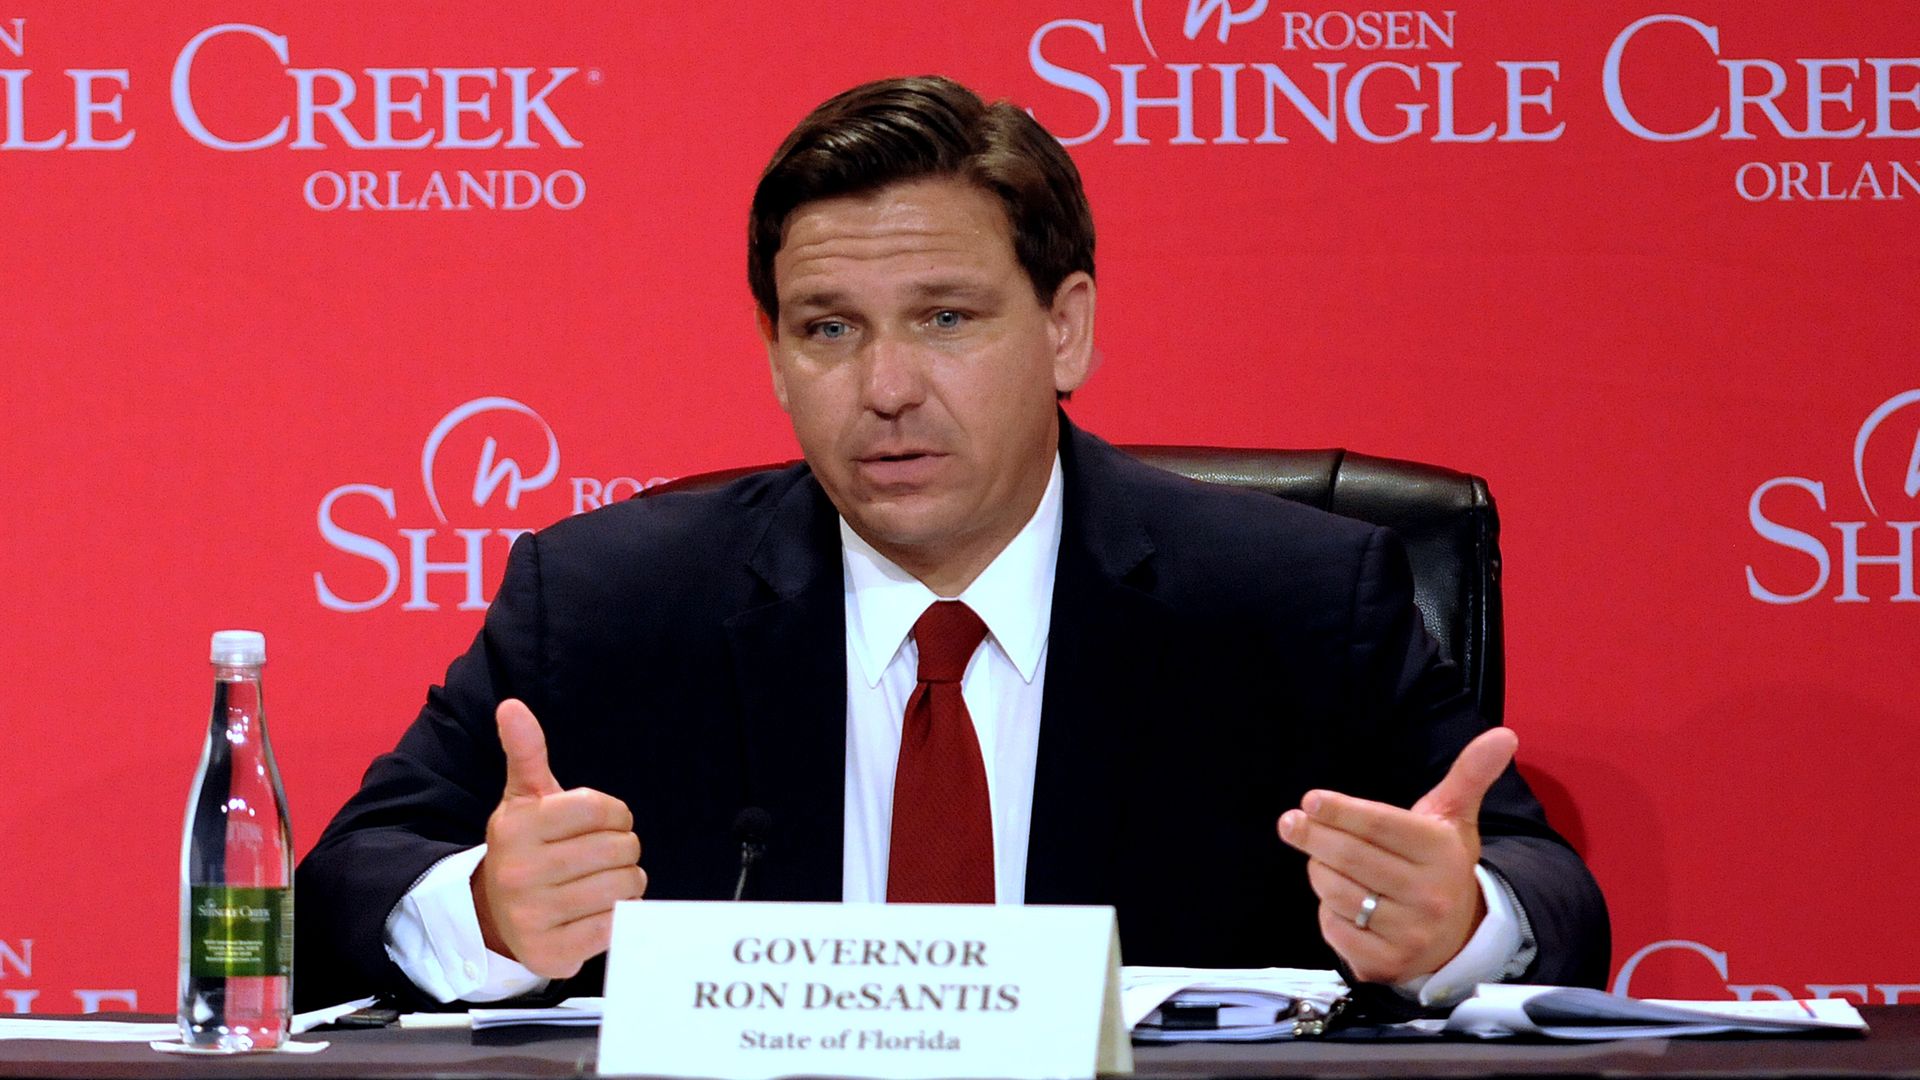 In this image, Ron DeSantis speaks while wearing a suit